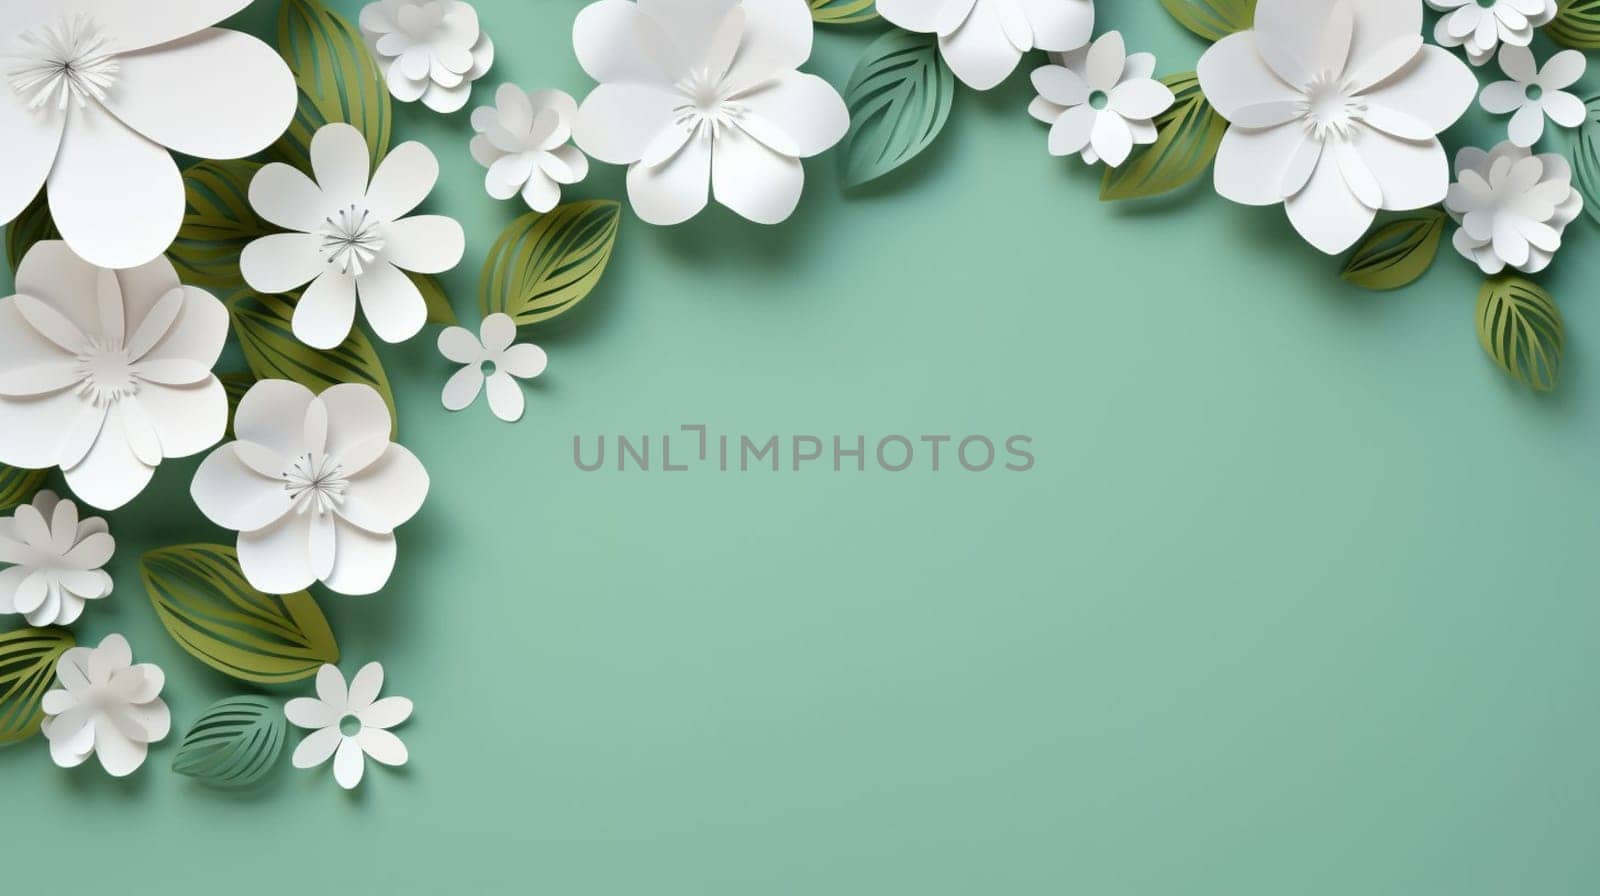 A 3D illustration of white paper flowers and green leaves on a solid dark green background, with a creative design and crafted aesthetic by kizuneko